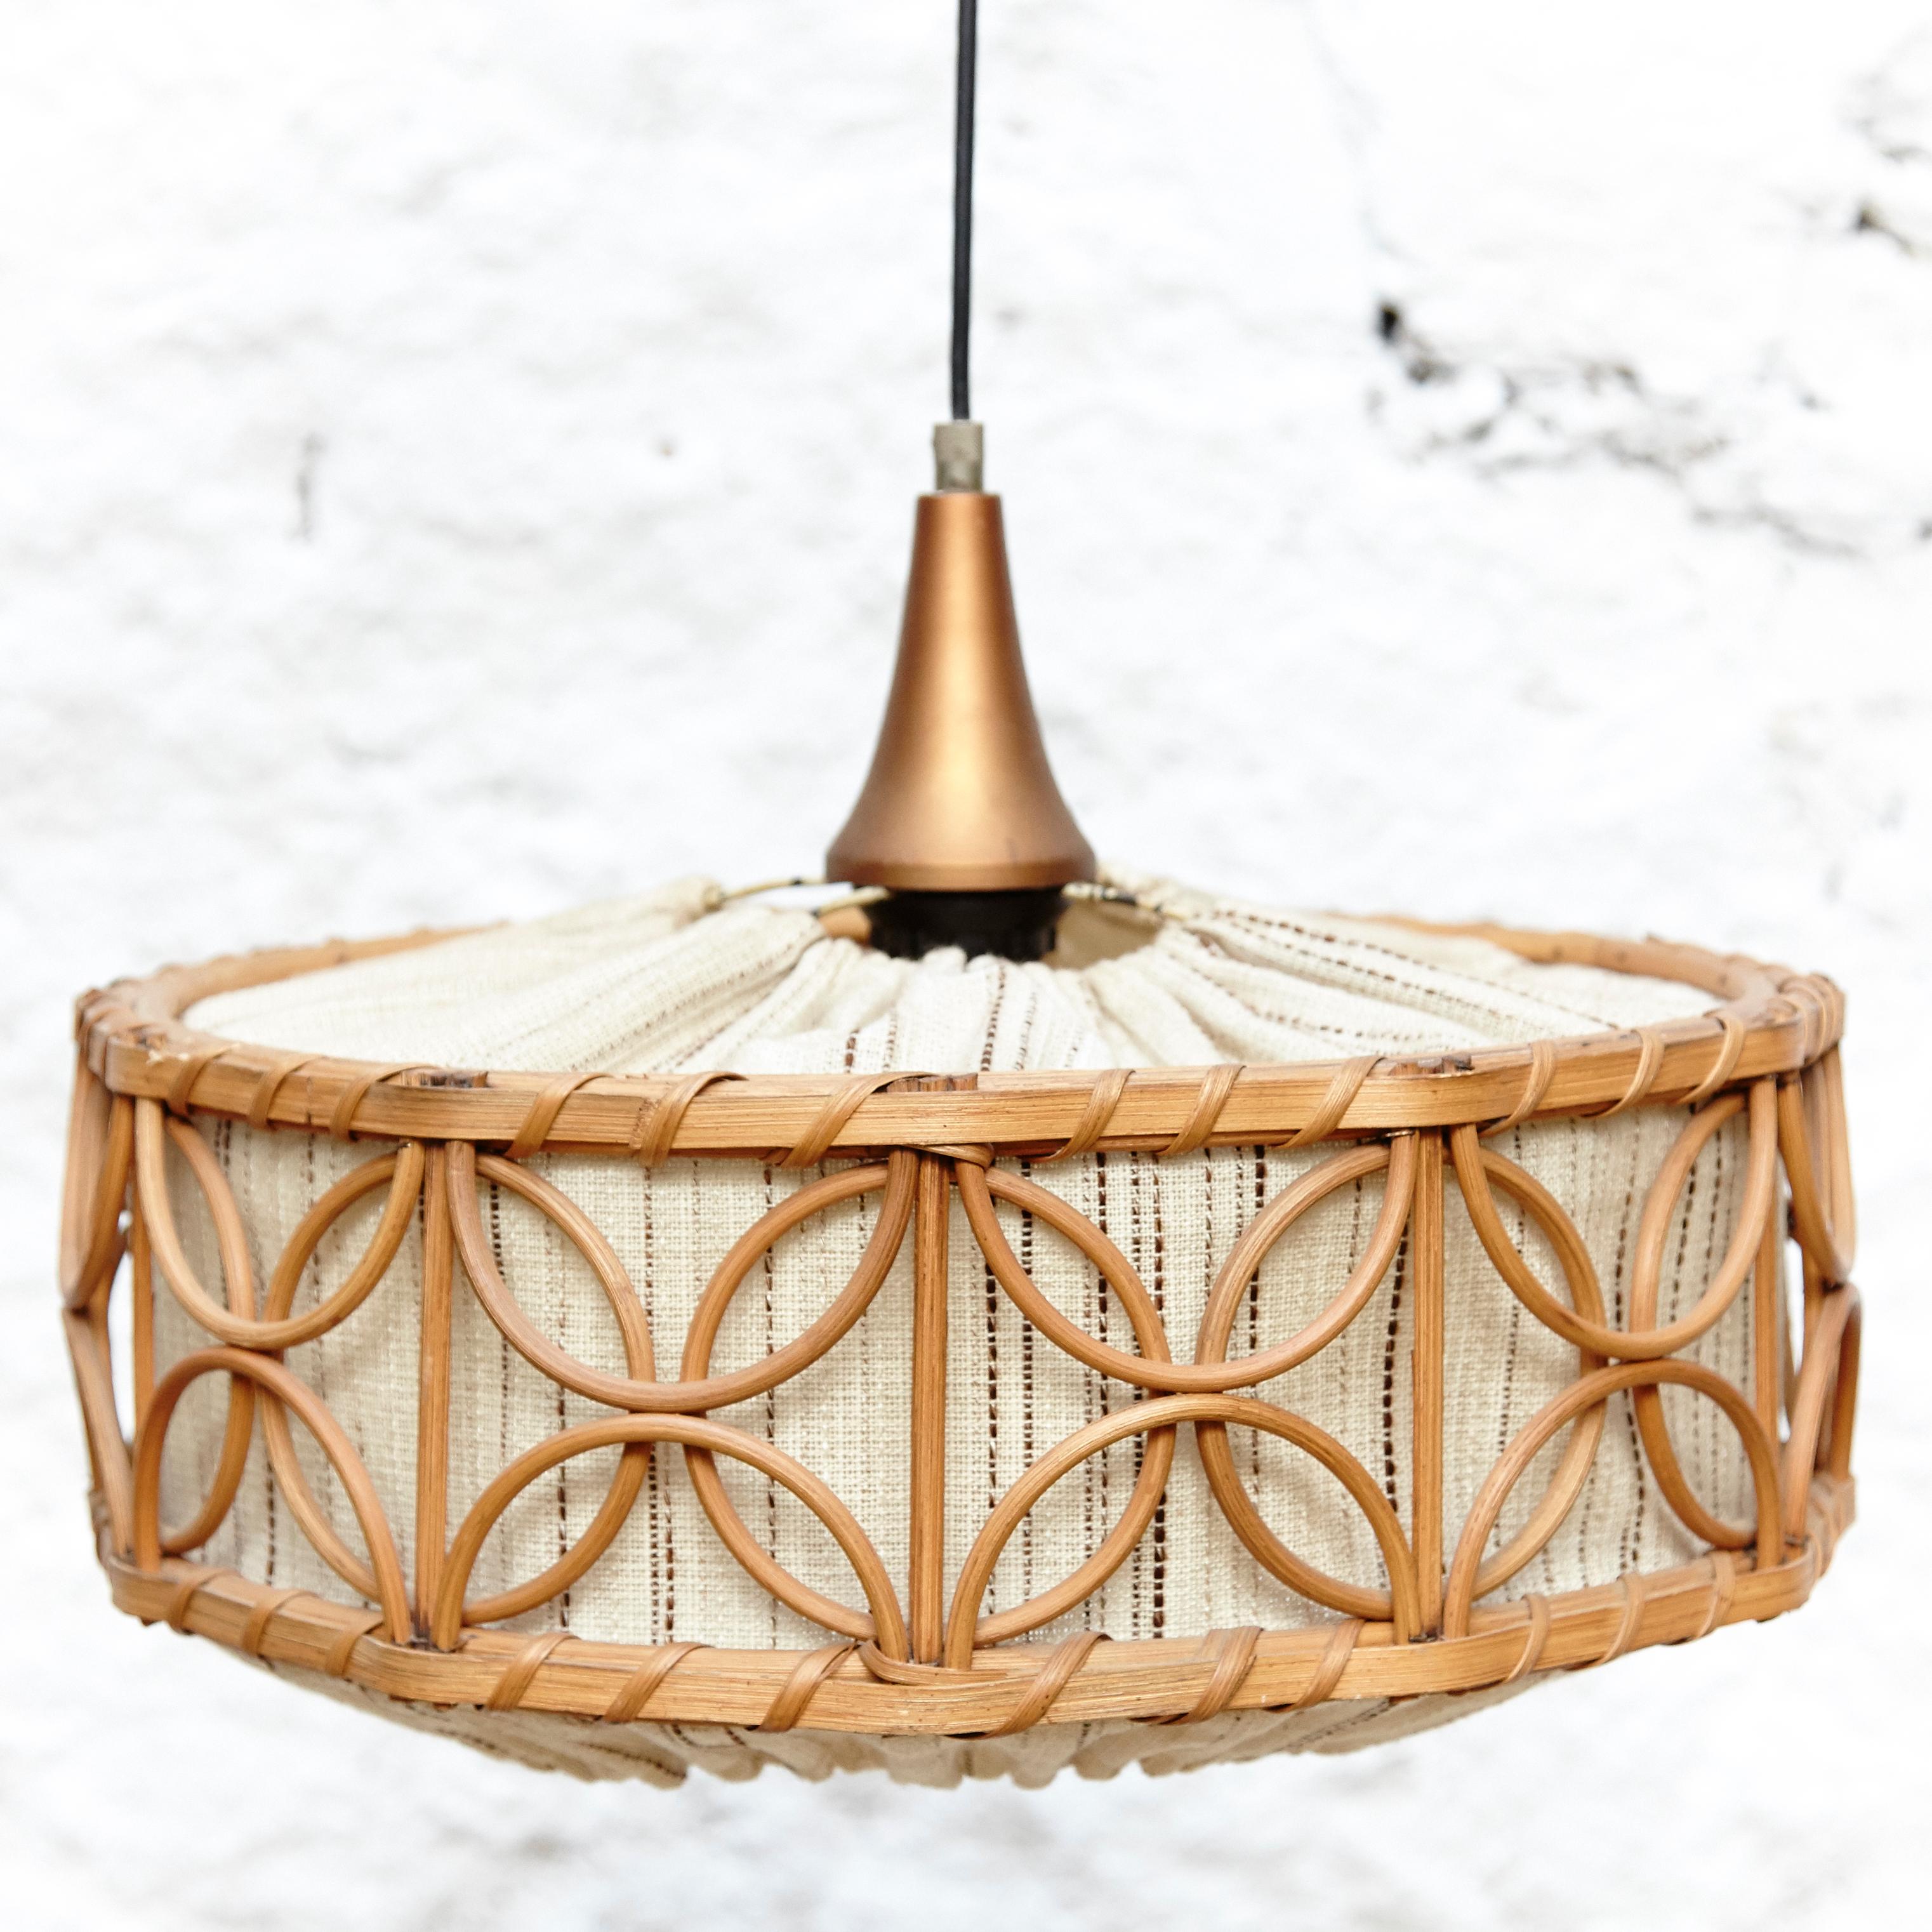 Rattan and fabric ceiling lamp by unknown designer.
Manufactured in France, circa 1960.

In original condition with in or wear consistent of age and use, preserving a beautiful patina.